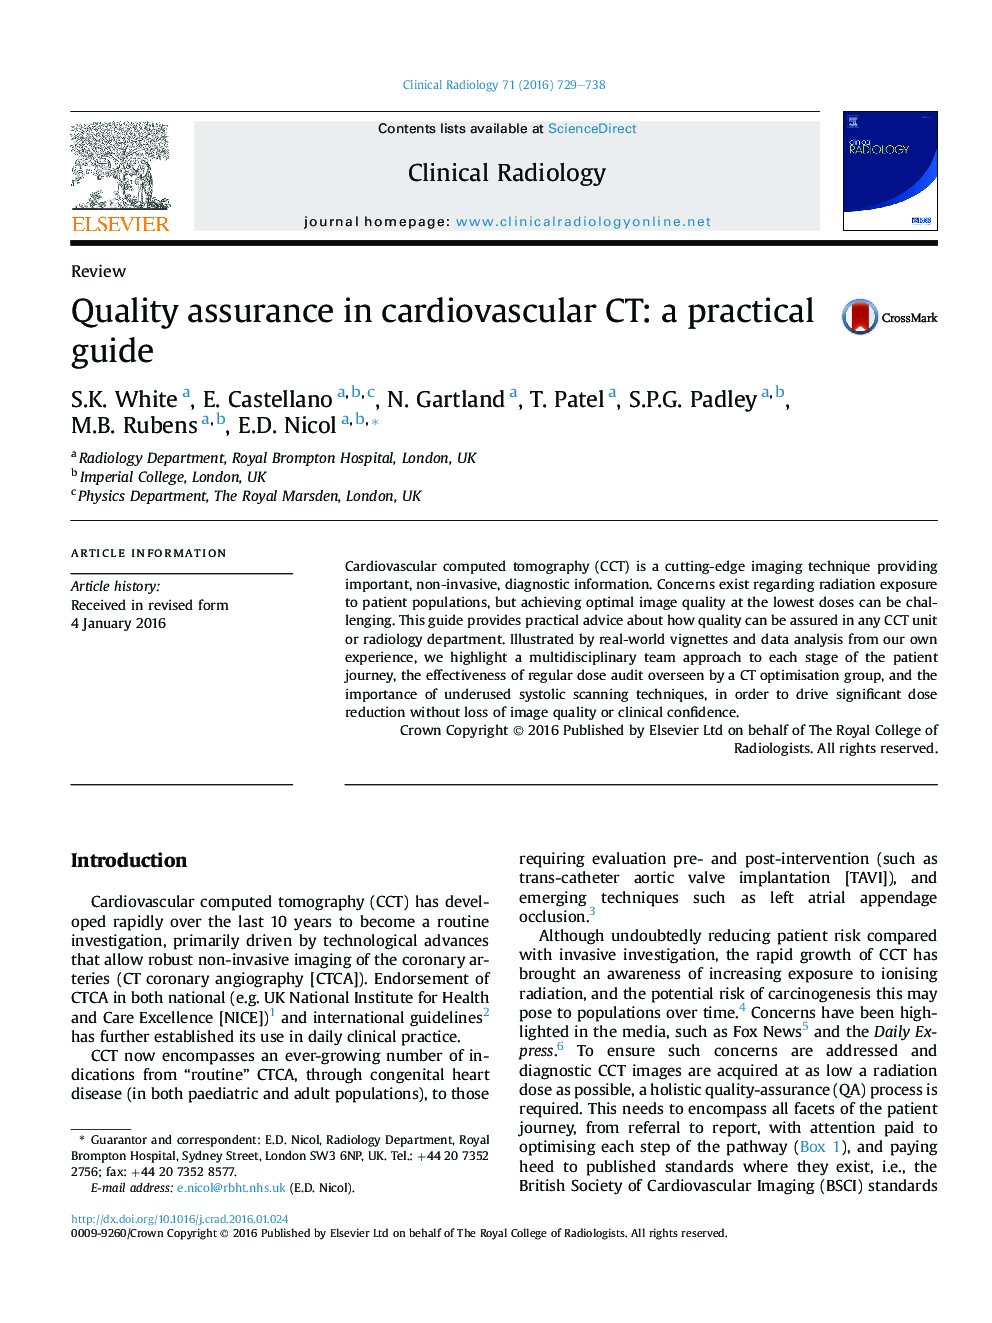 Quality assurance in cardiovascular CT: a practical guide